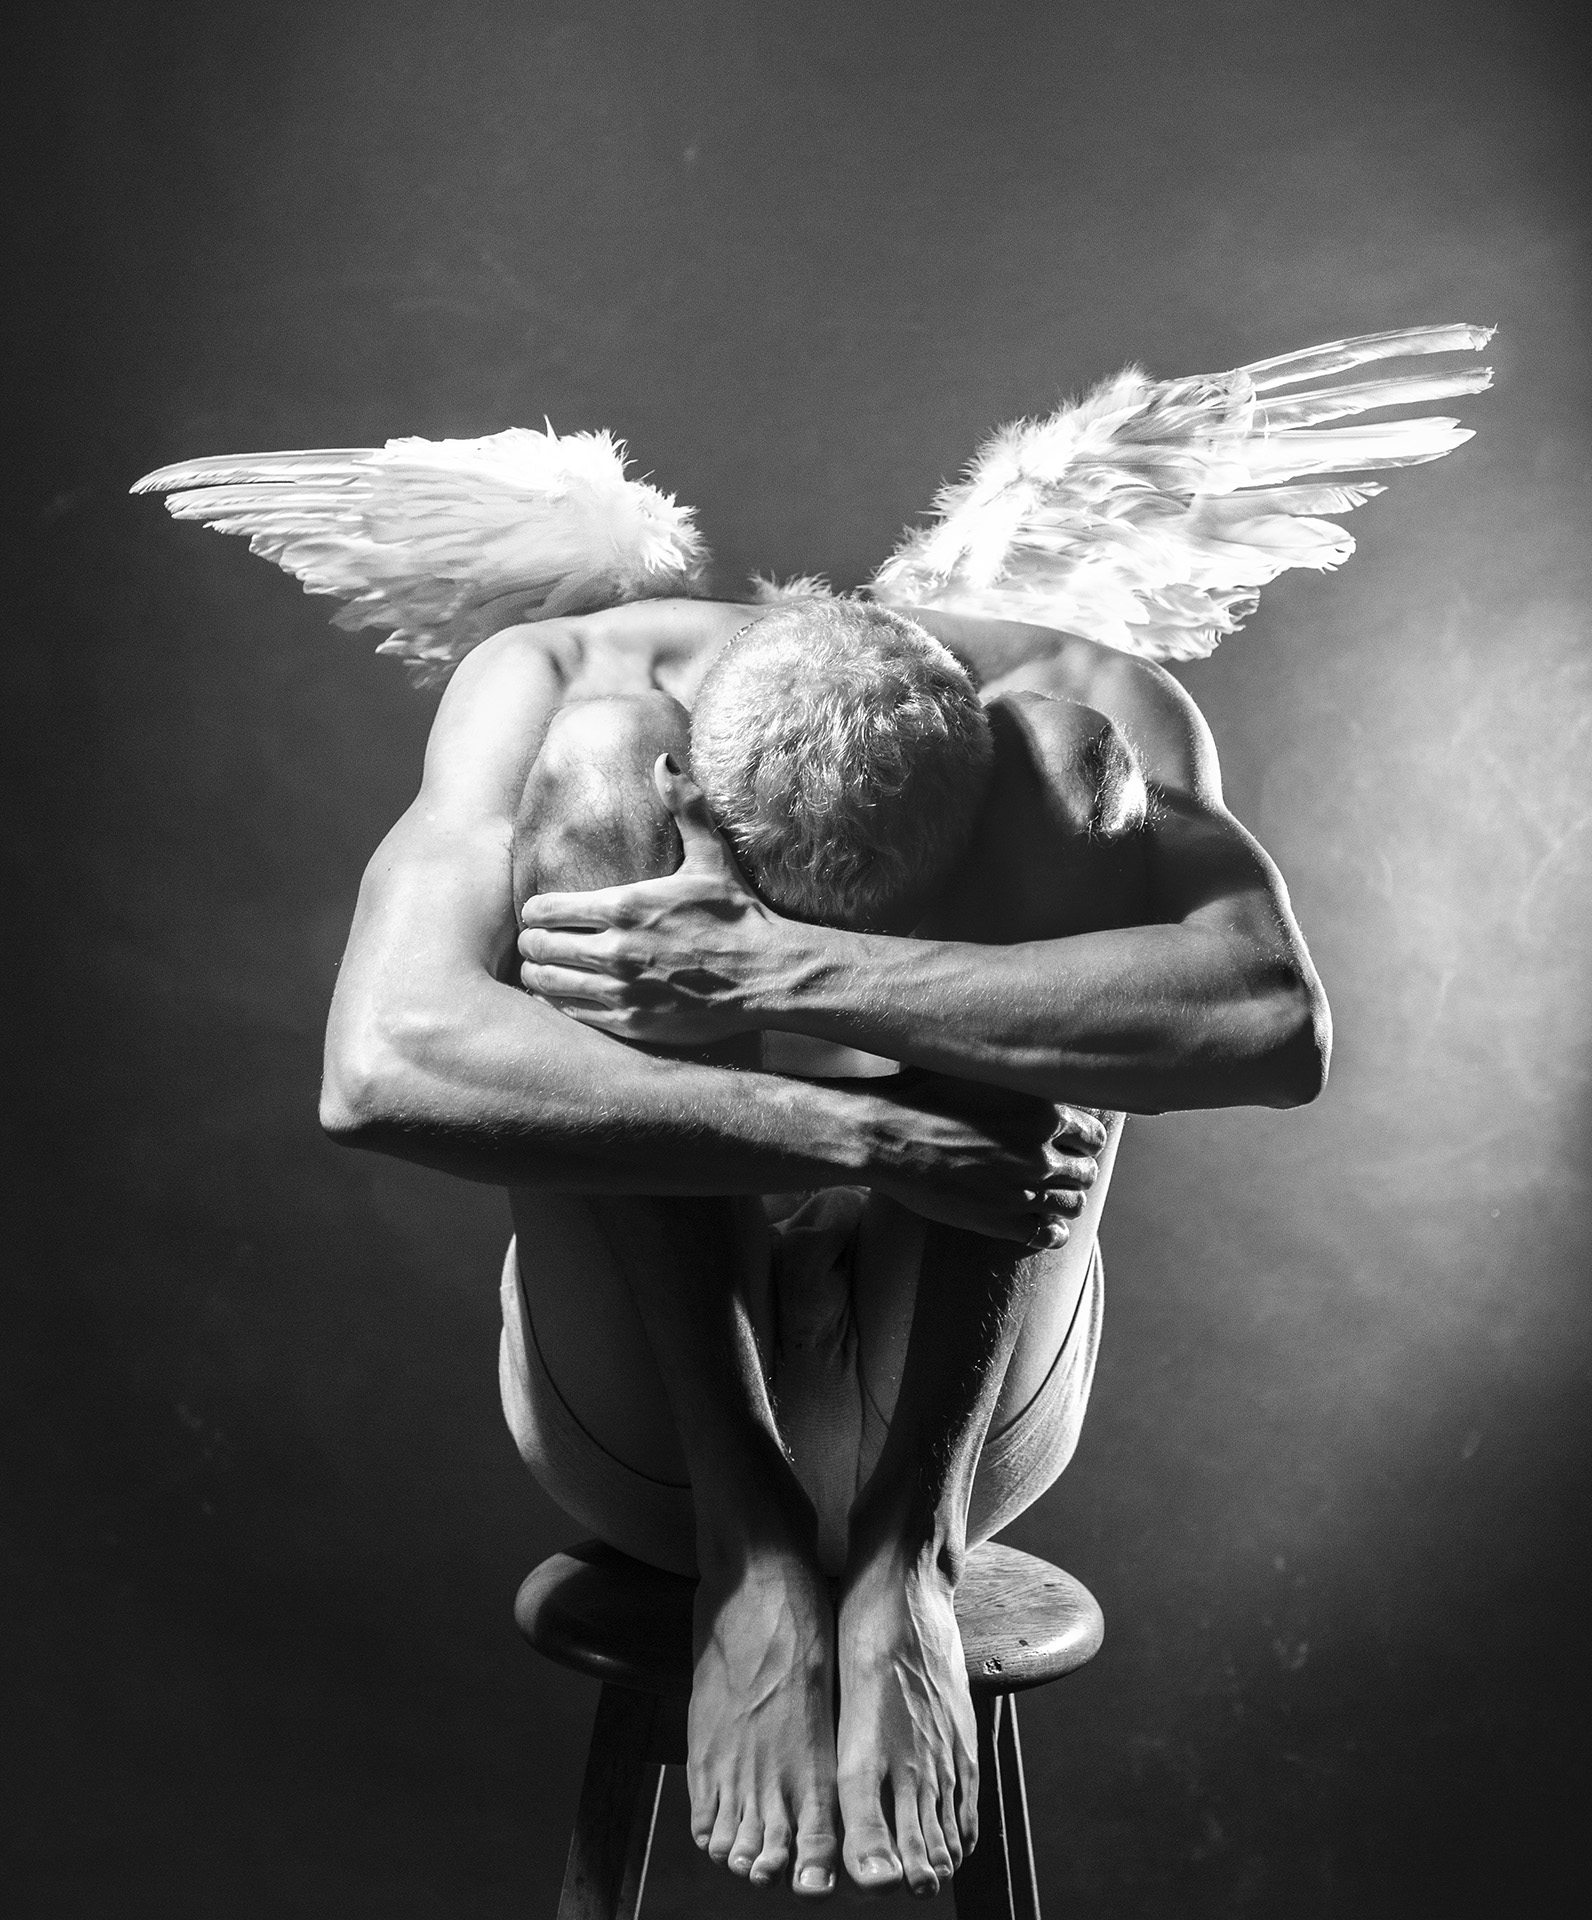 Mémoire Poétique A masculine figure is huddled on a bench in a position of self-soothing. A pair of wings stick out from his back, glowing with light.